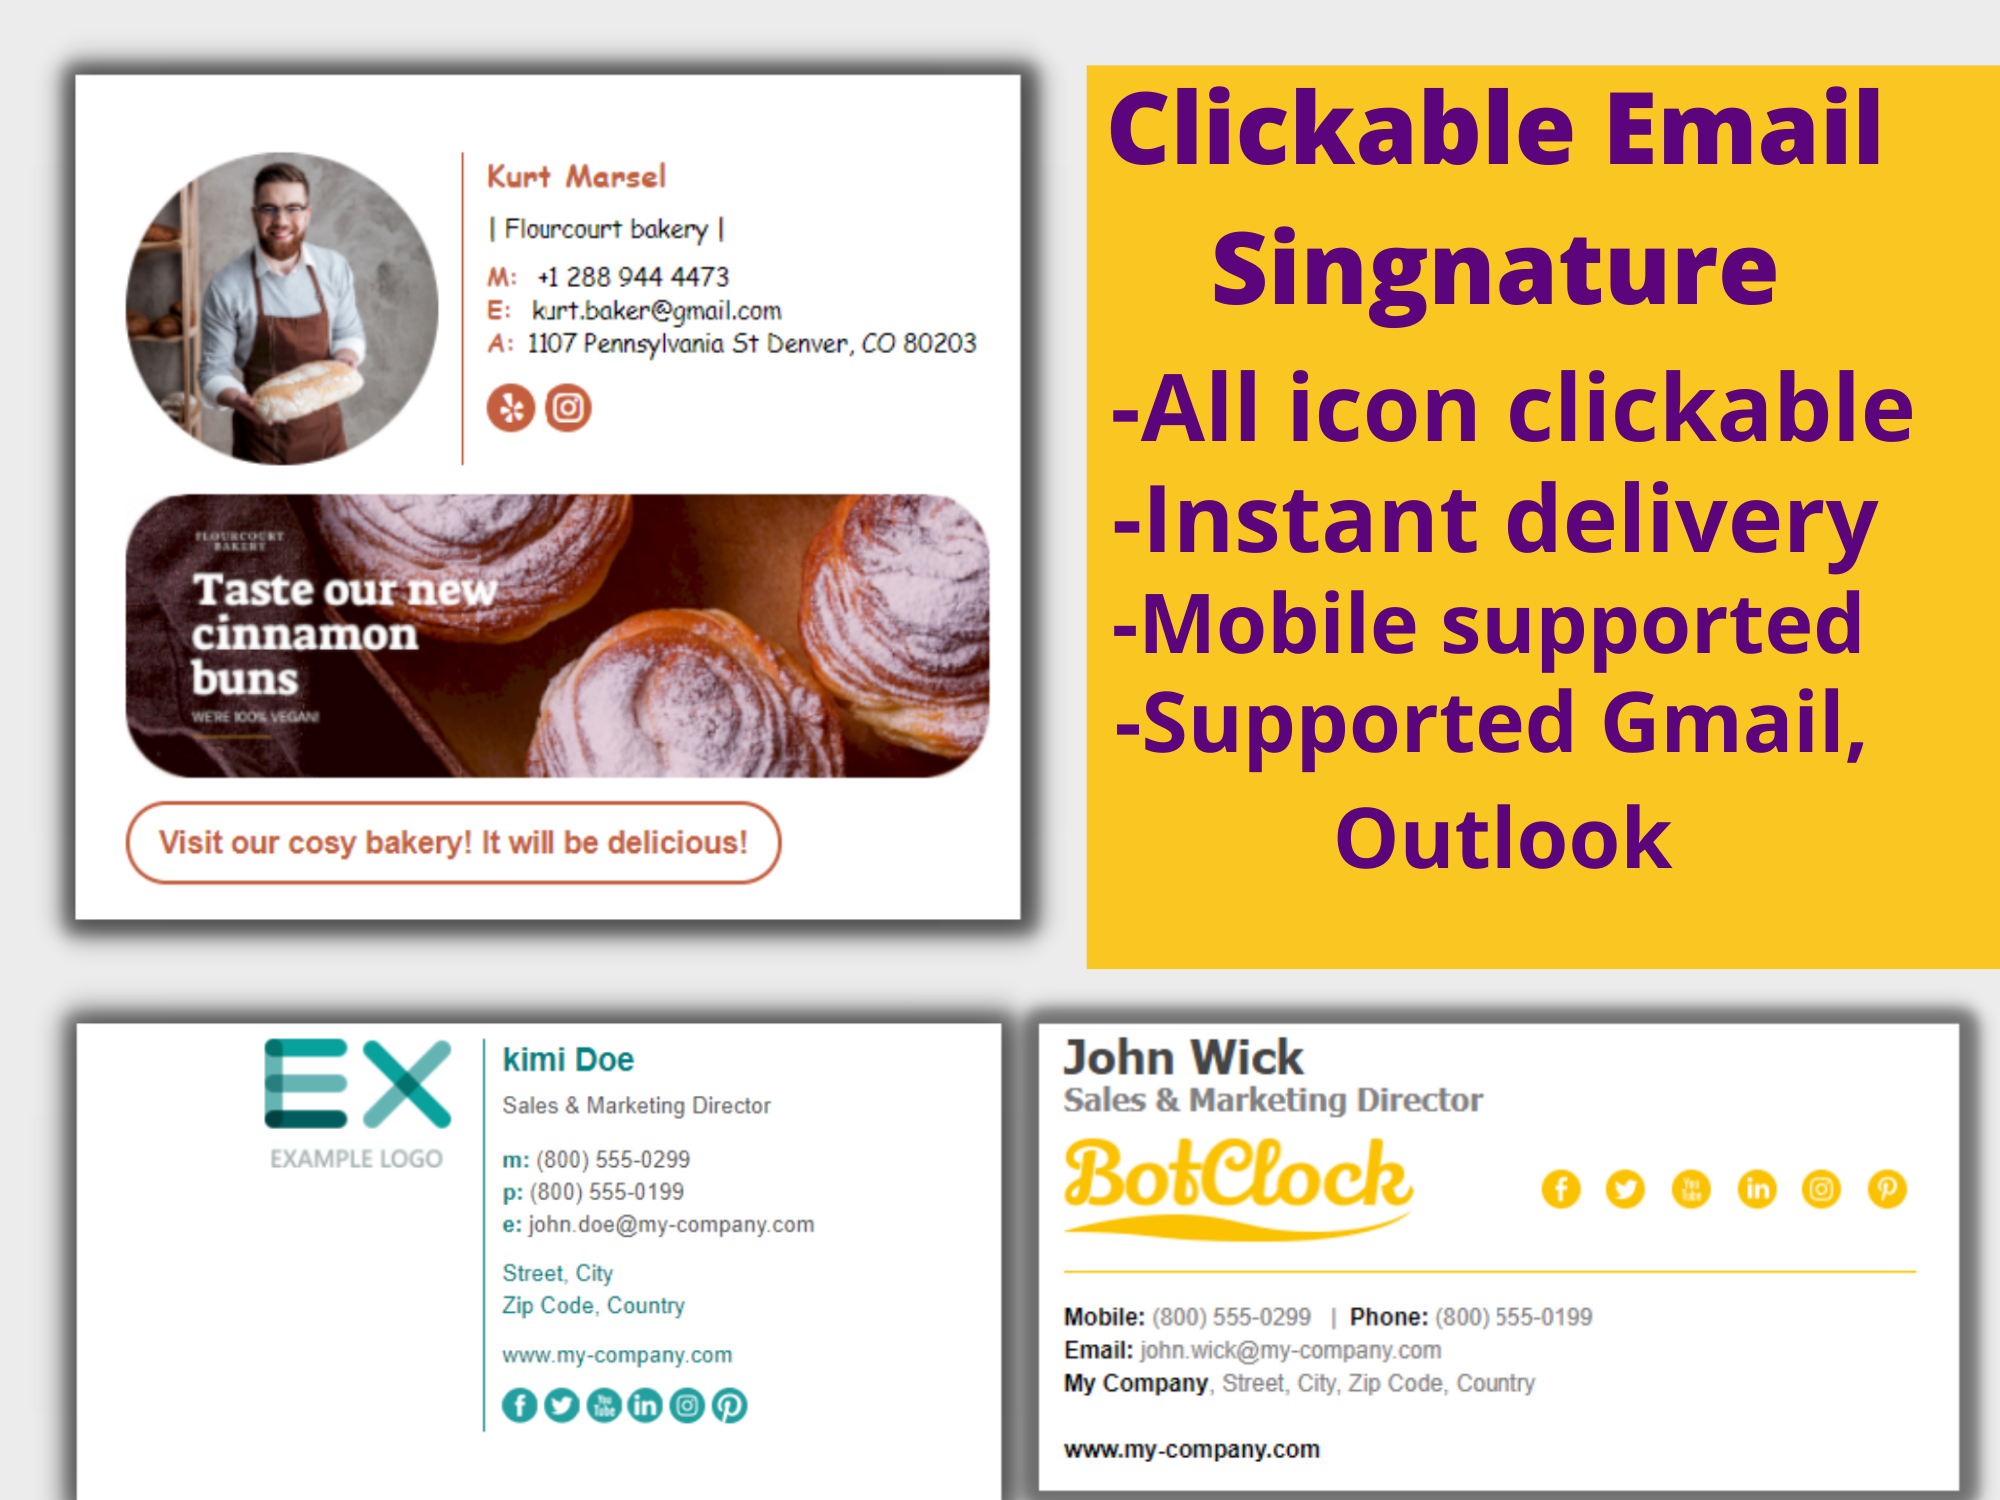 I Will Design Professional Looking Clickable HTML Email Signature, Outlook Signature